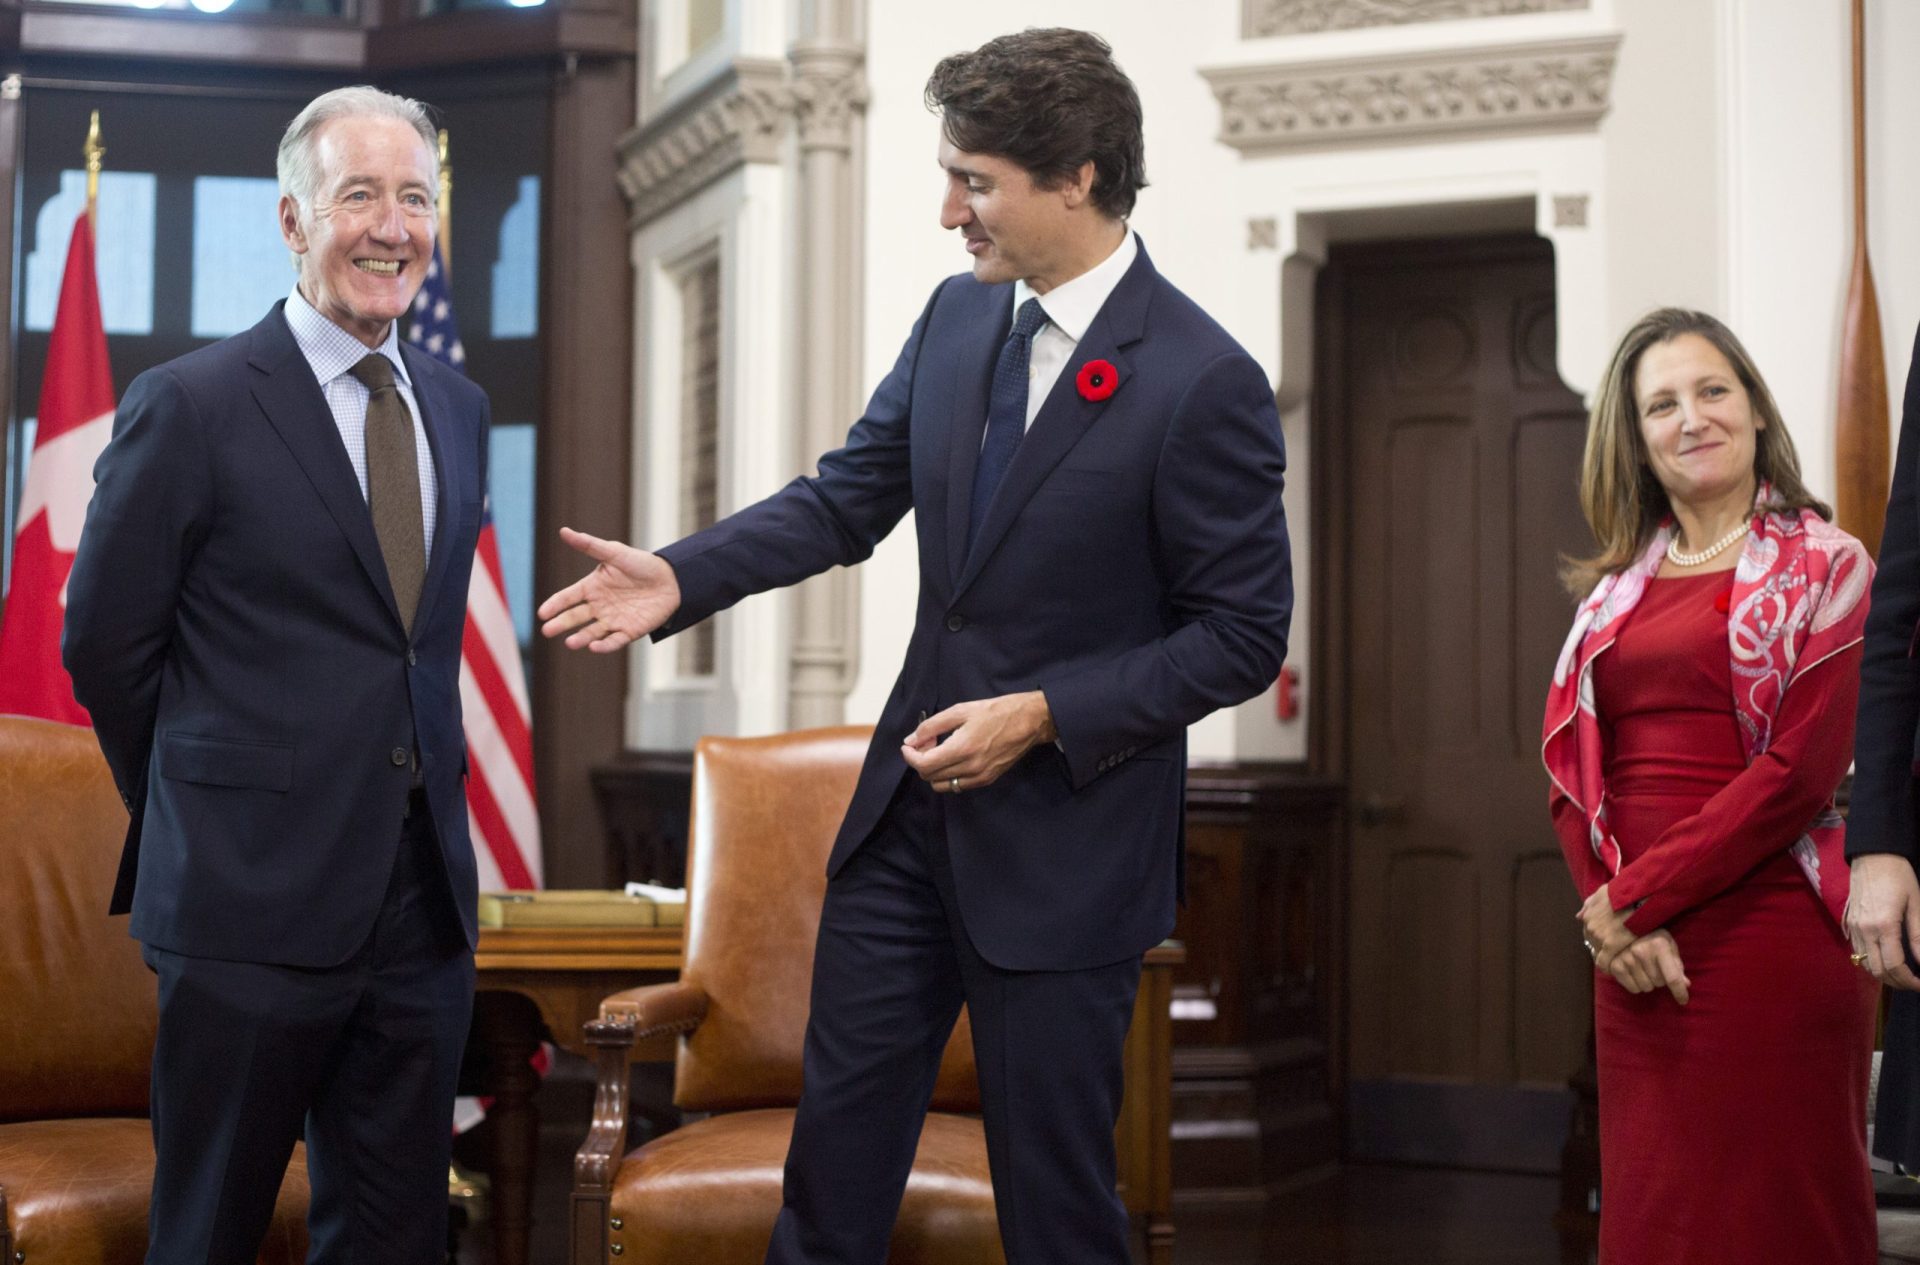 Prime Minister meets with Richard E. Neal, Chairman of the Committee on Ways and Means of the United States House of Representatives, along with Minister of Foreign Affairs Chrystia Freeland in his office on Parliament Hill on Nov. 6, 2019.